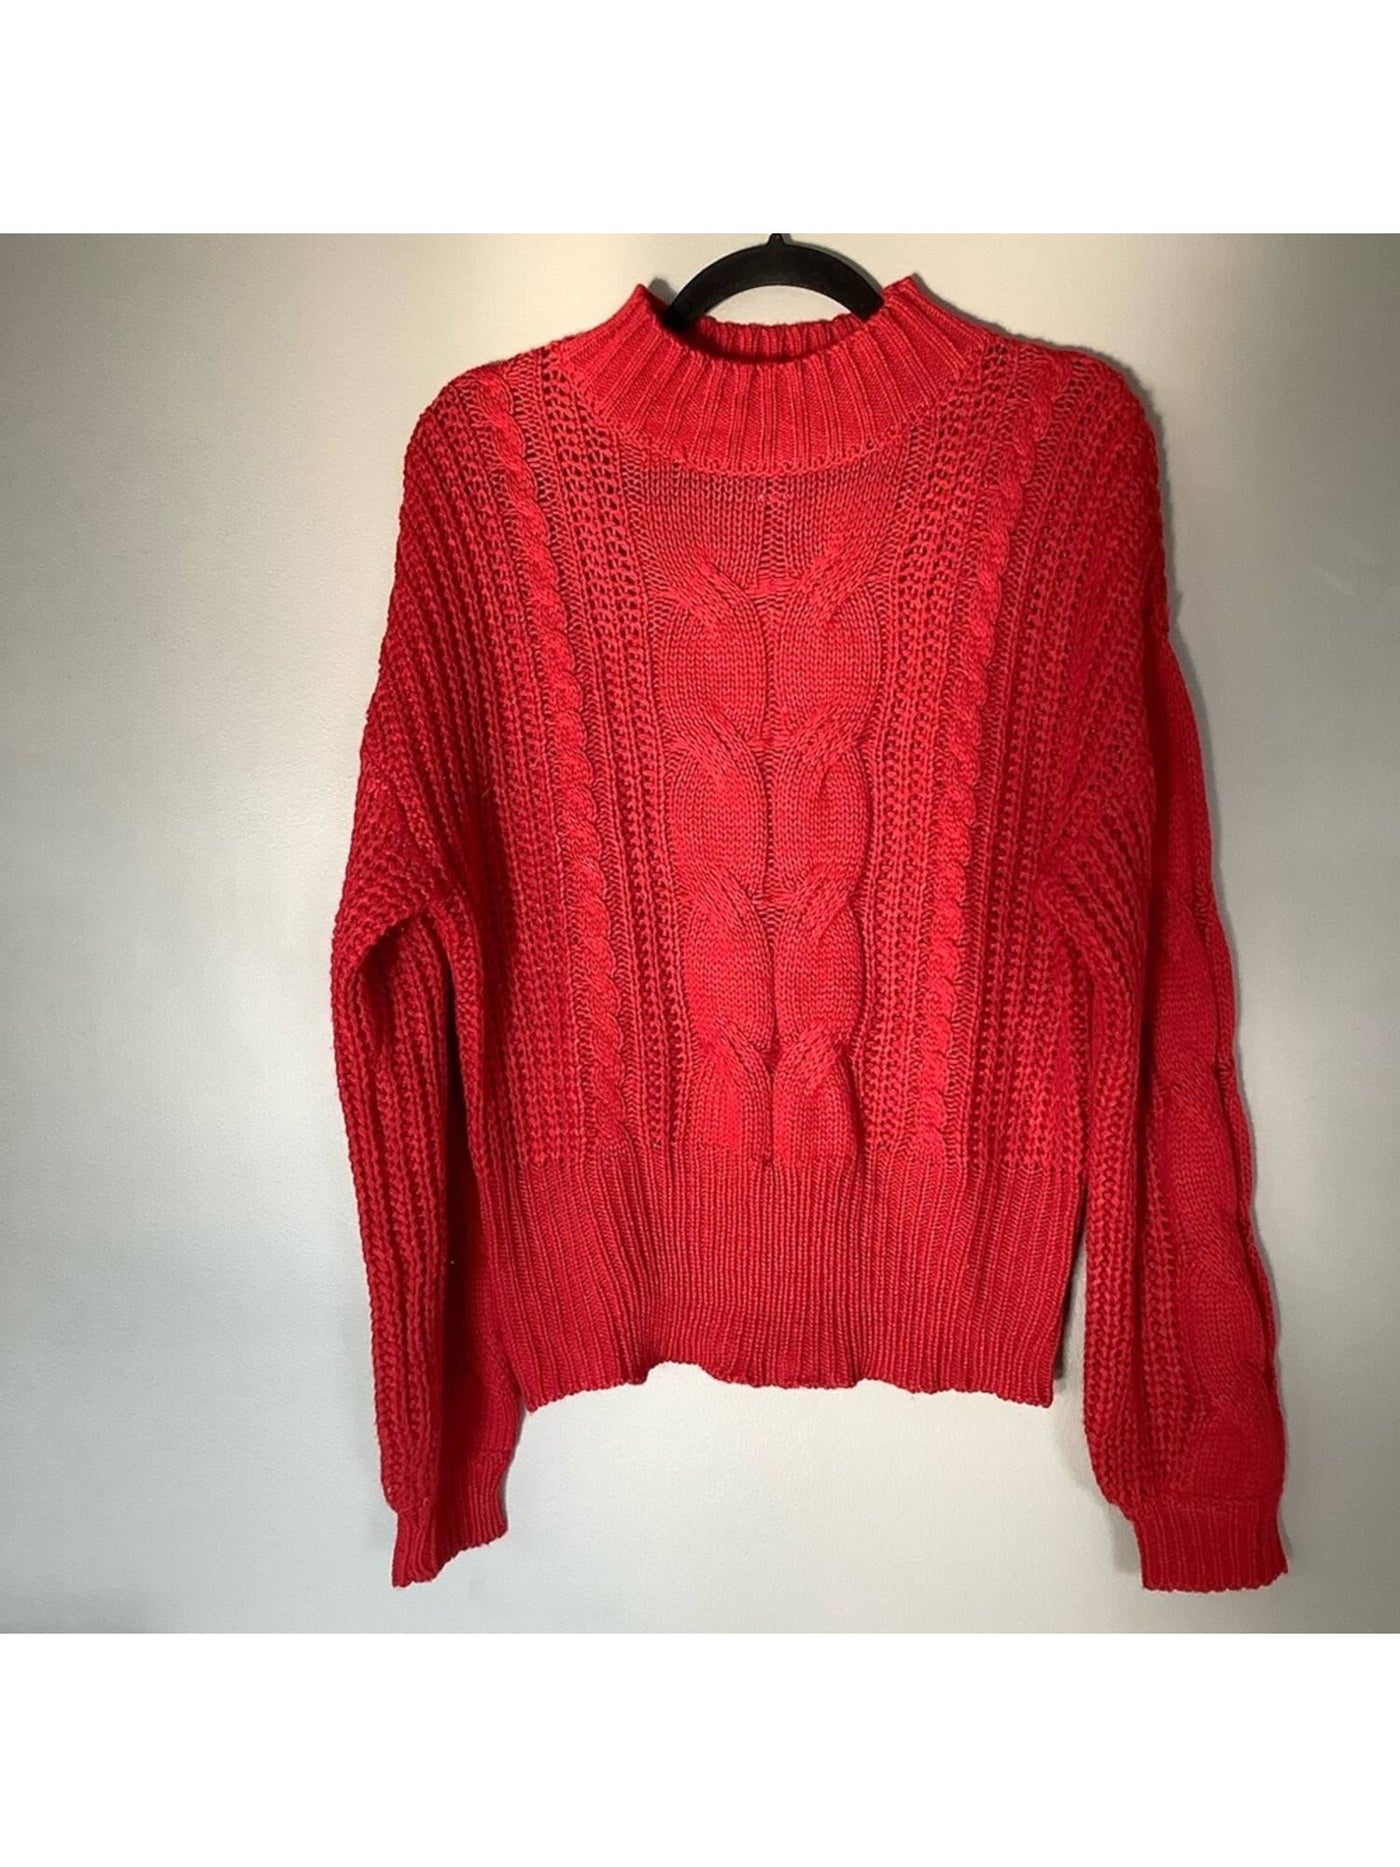 AMERICAN RAG Womens Red Cable-knit Pullover Long Sleeve Turtle Neck Sweater Juniors M